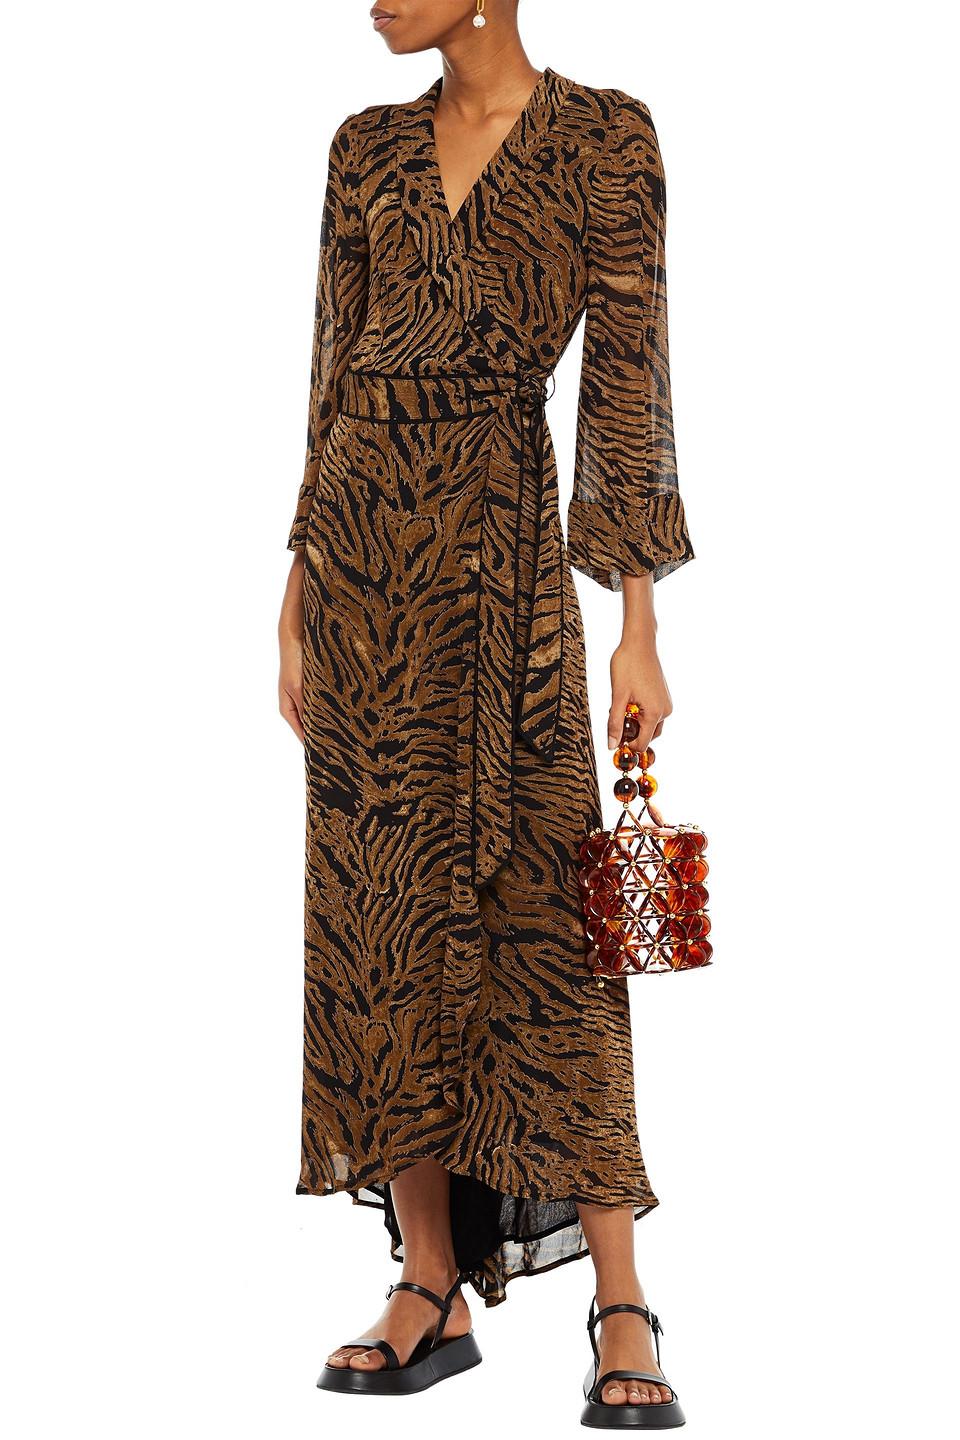 Ganni Synthetic Tiger-print Georgette ...